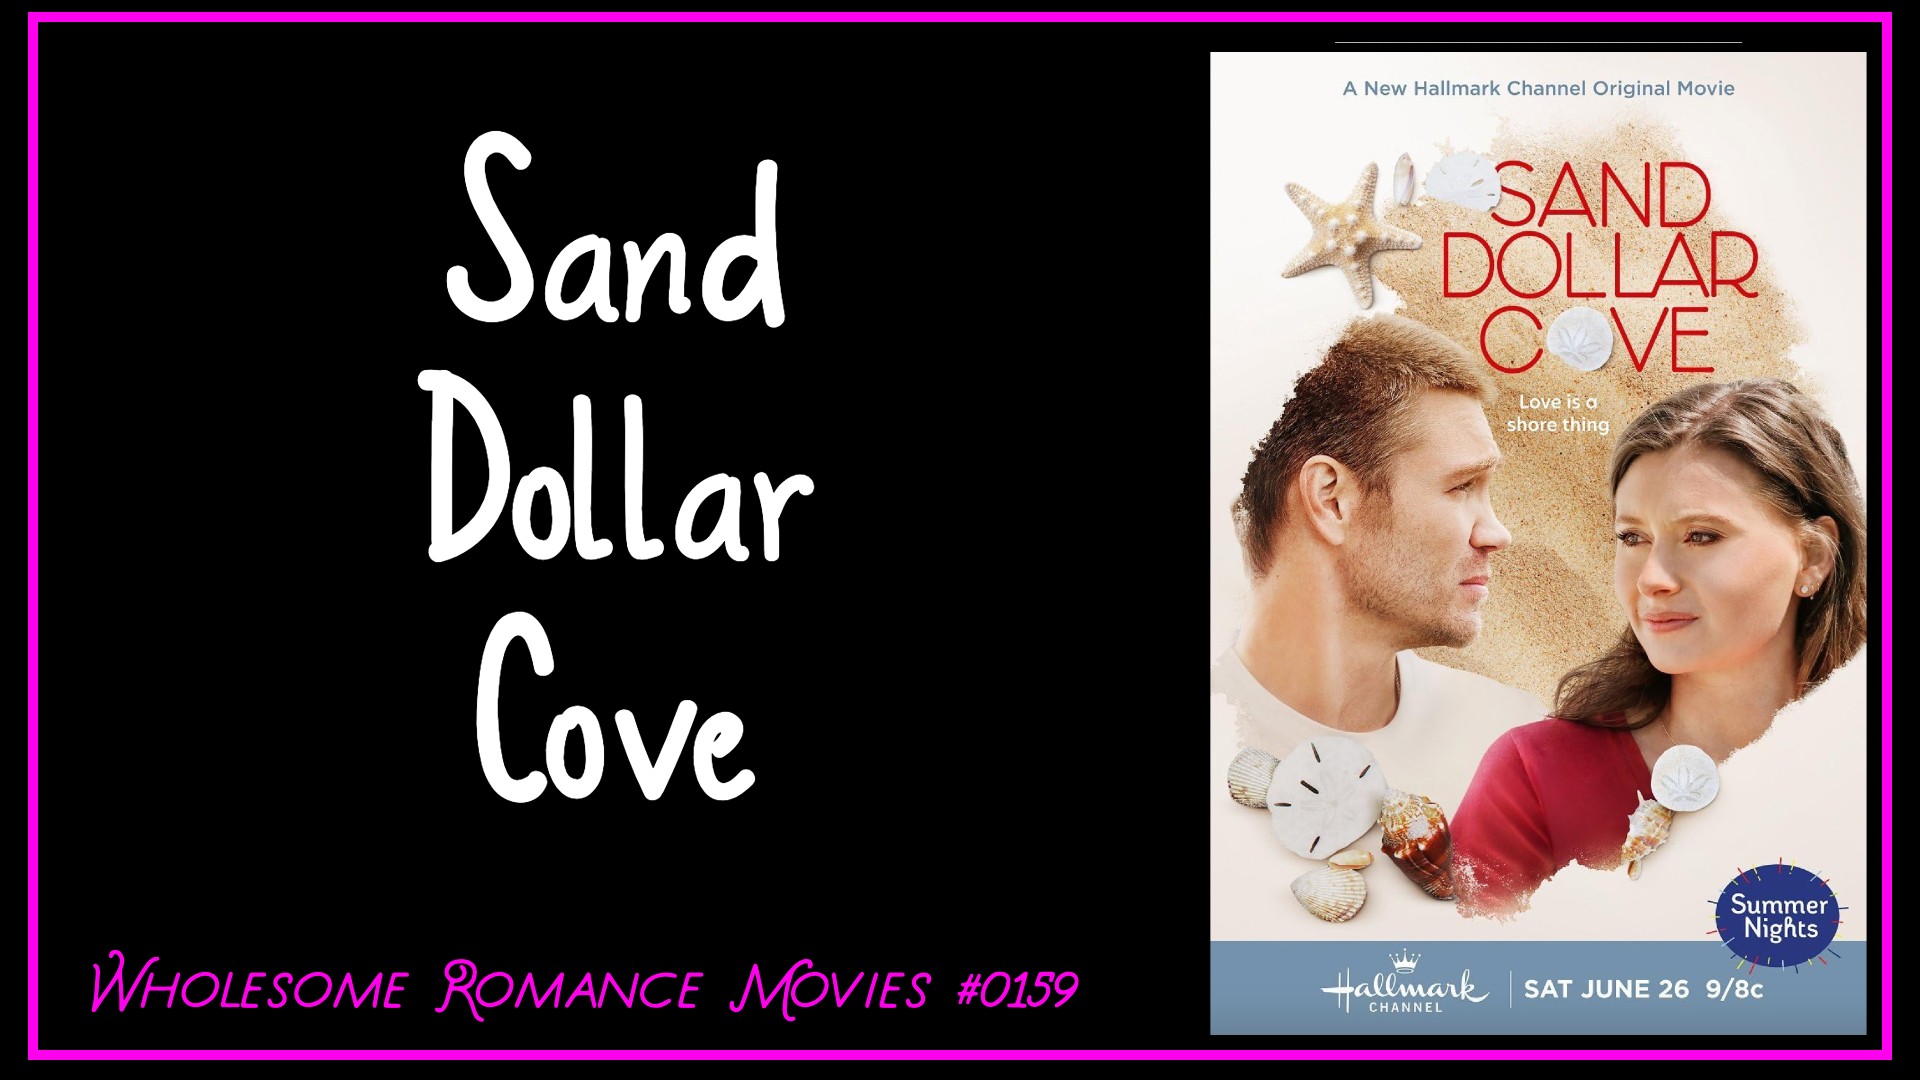 Sand Dollar Cove (2021) WRM Review